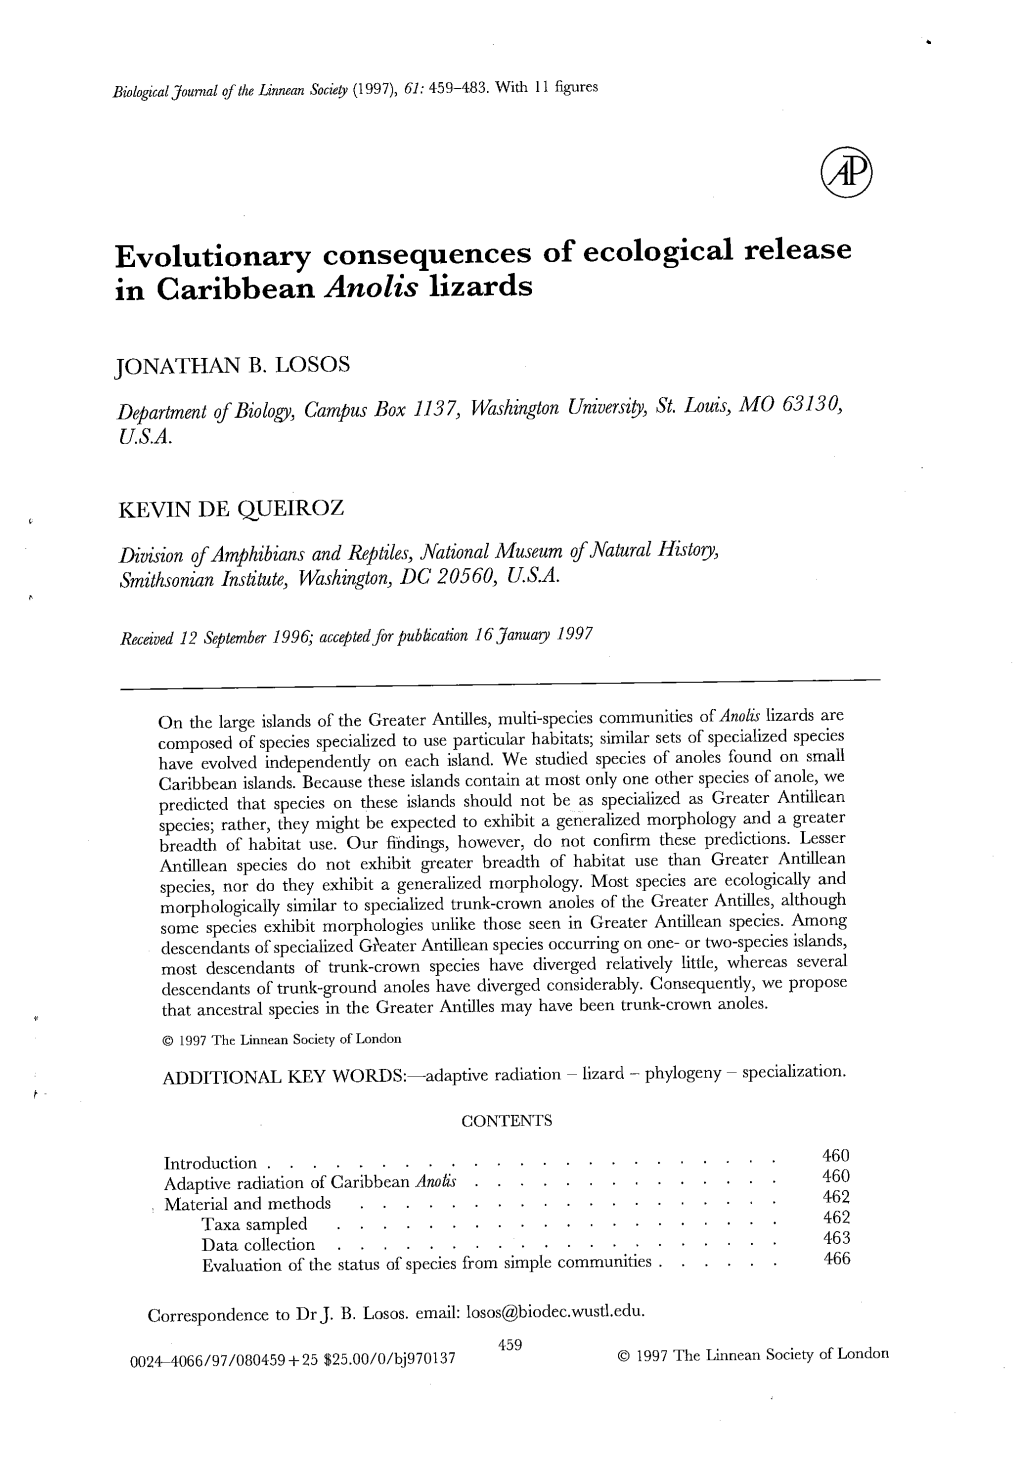 Evolutionary Consequences of Ecological Release in Caribbean Anolis Lizards